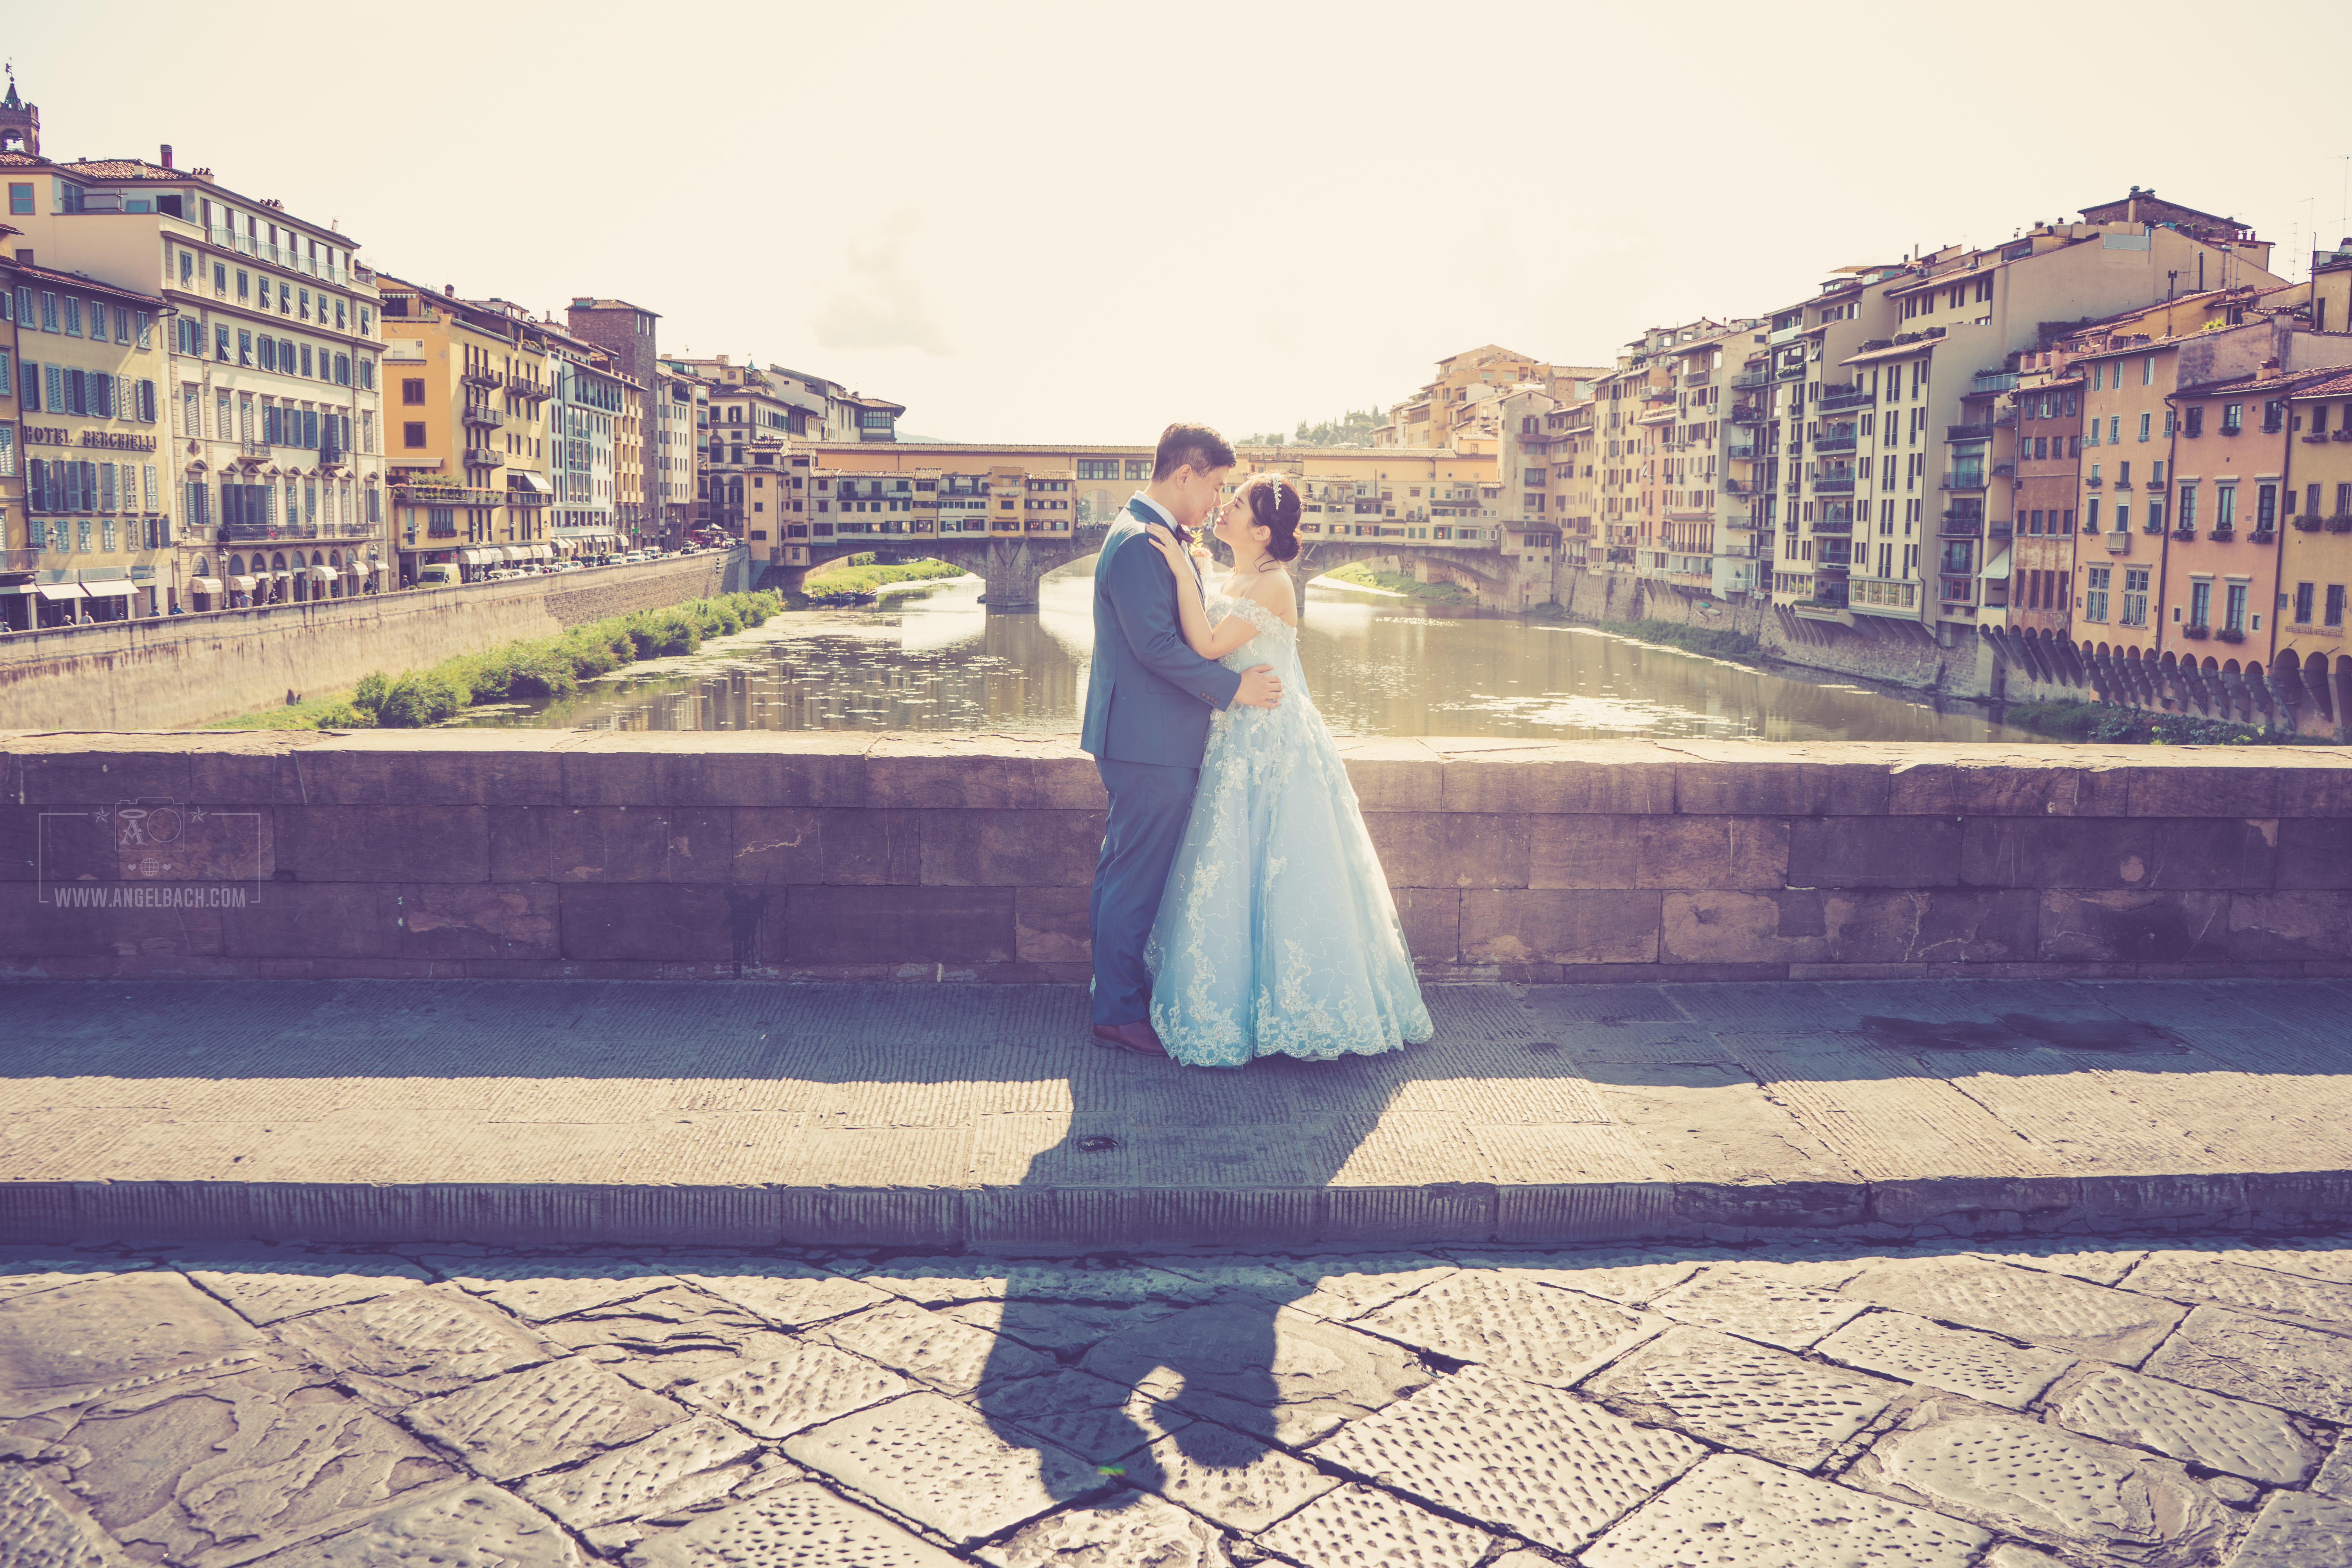 Night Photography, Long Exposure, Cityscape, Landscape,Florence, Bride, River, Tourist Attraction, Lights, Ancient place, Arno River, Tuscany, Ponte Vecchio, Italy, Wedding in Italy